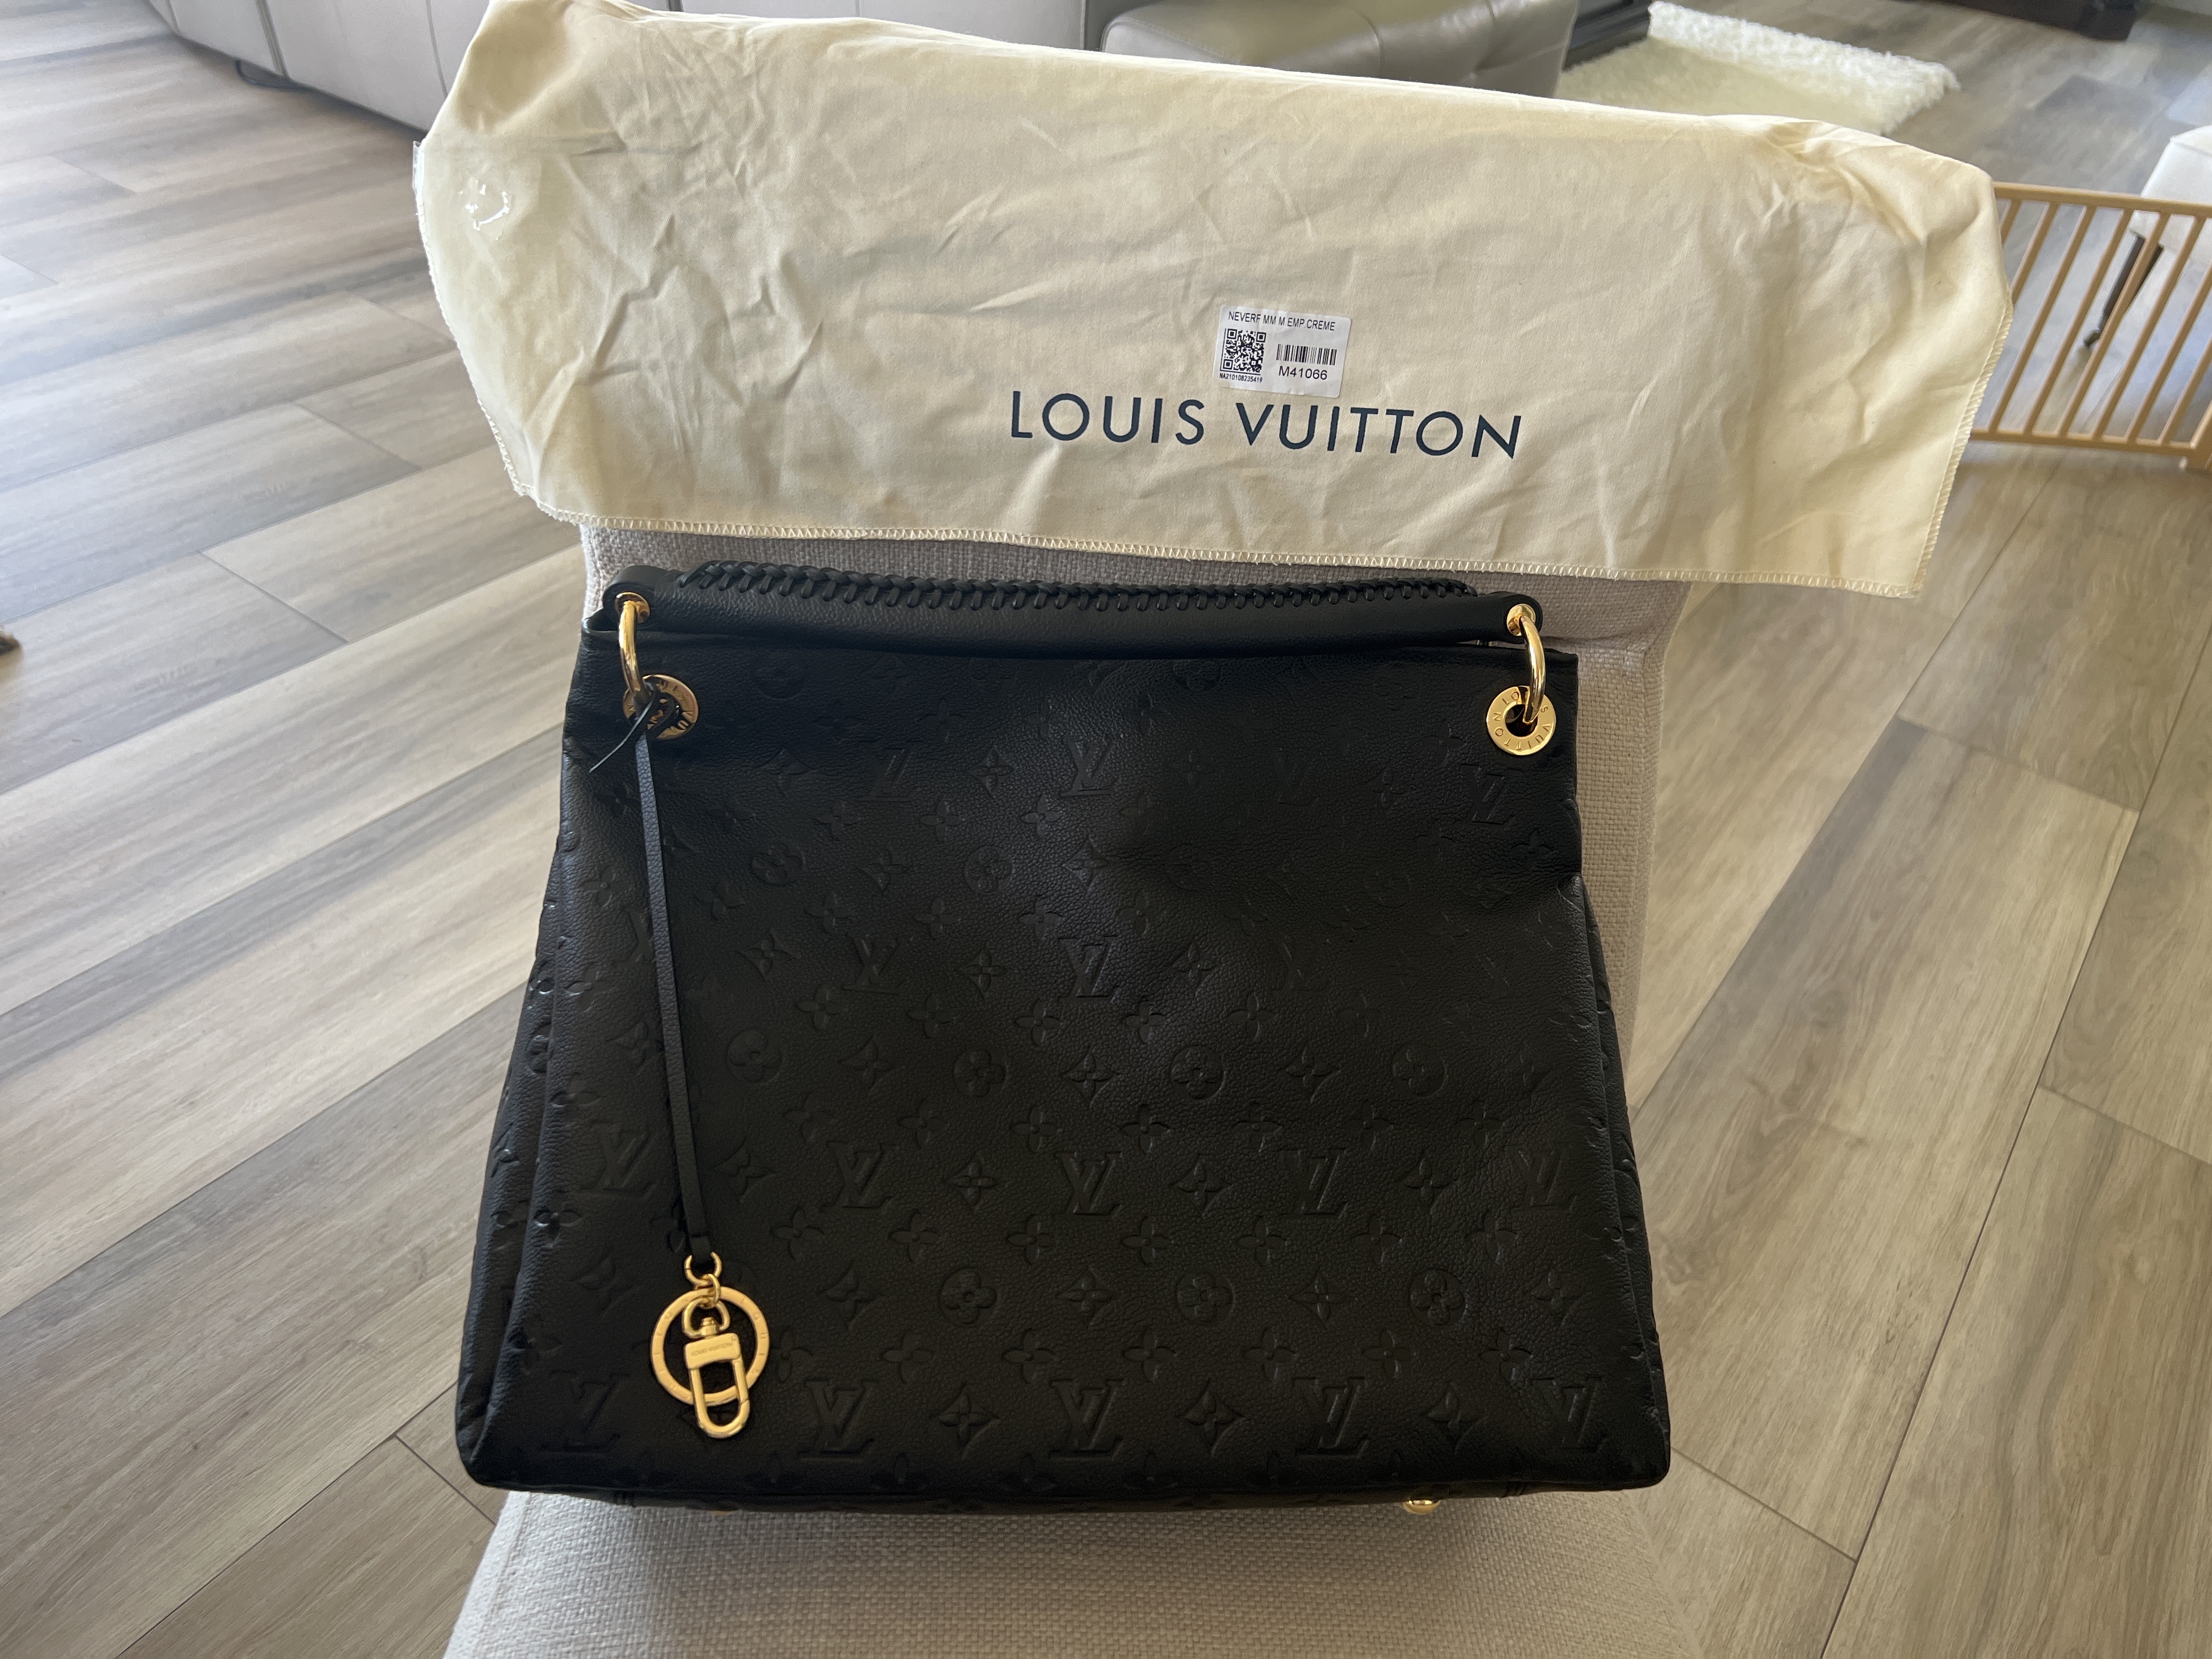 Looking to purchase my first LV, I have read conflicting reviews